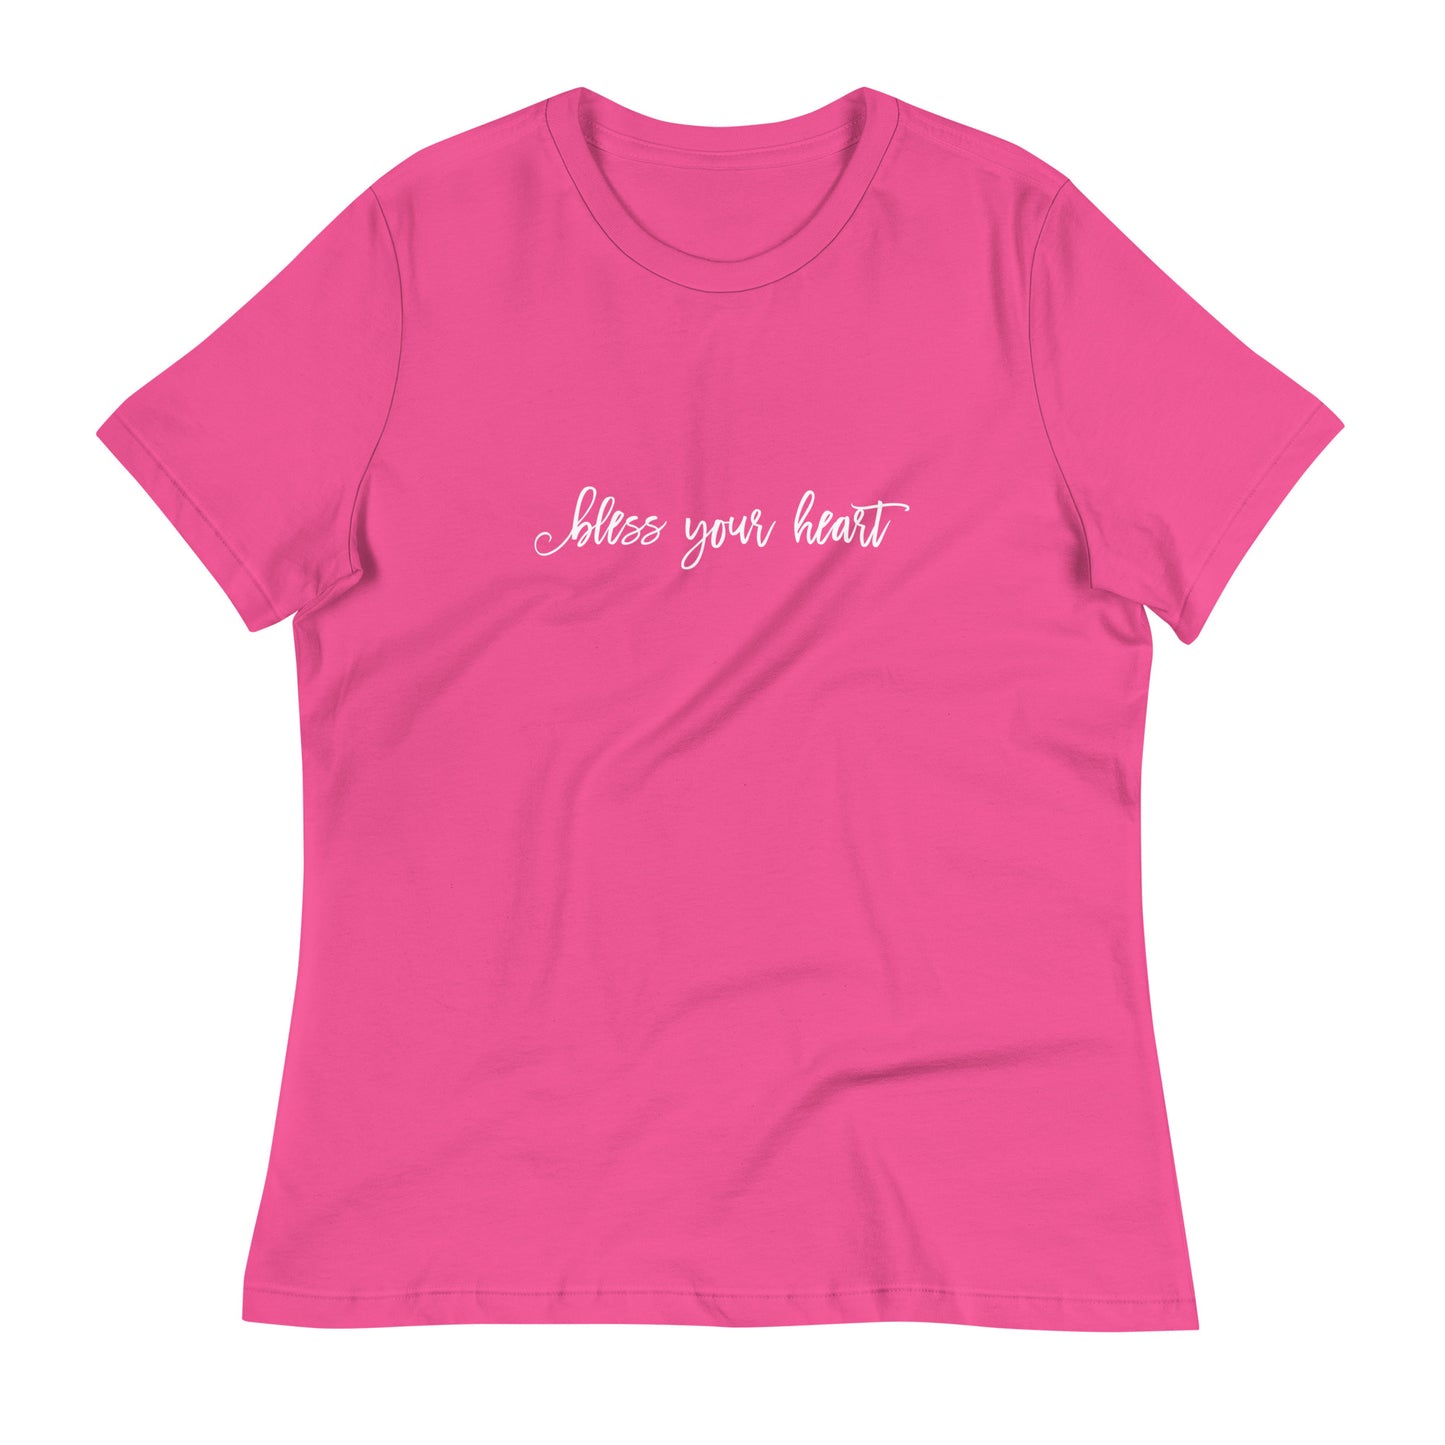 Berry (hot pink) women's relaxed fit t-shirt with white graphic in an excessively twee font: "bless your heart"